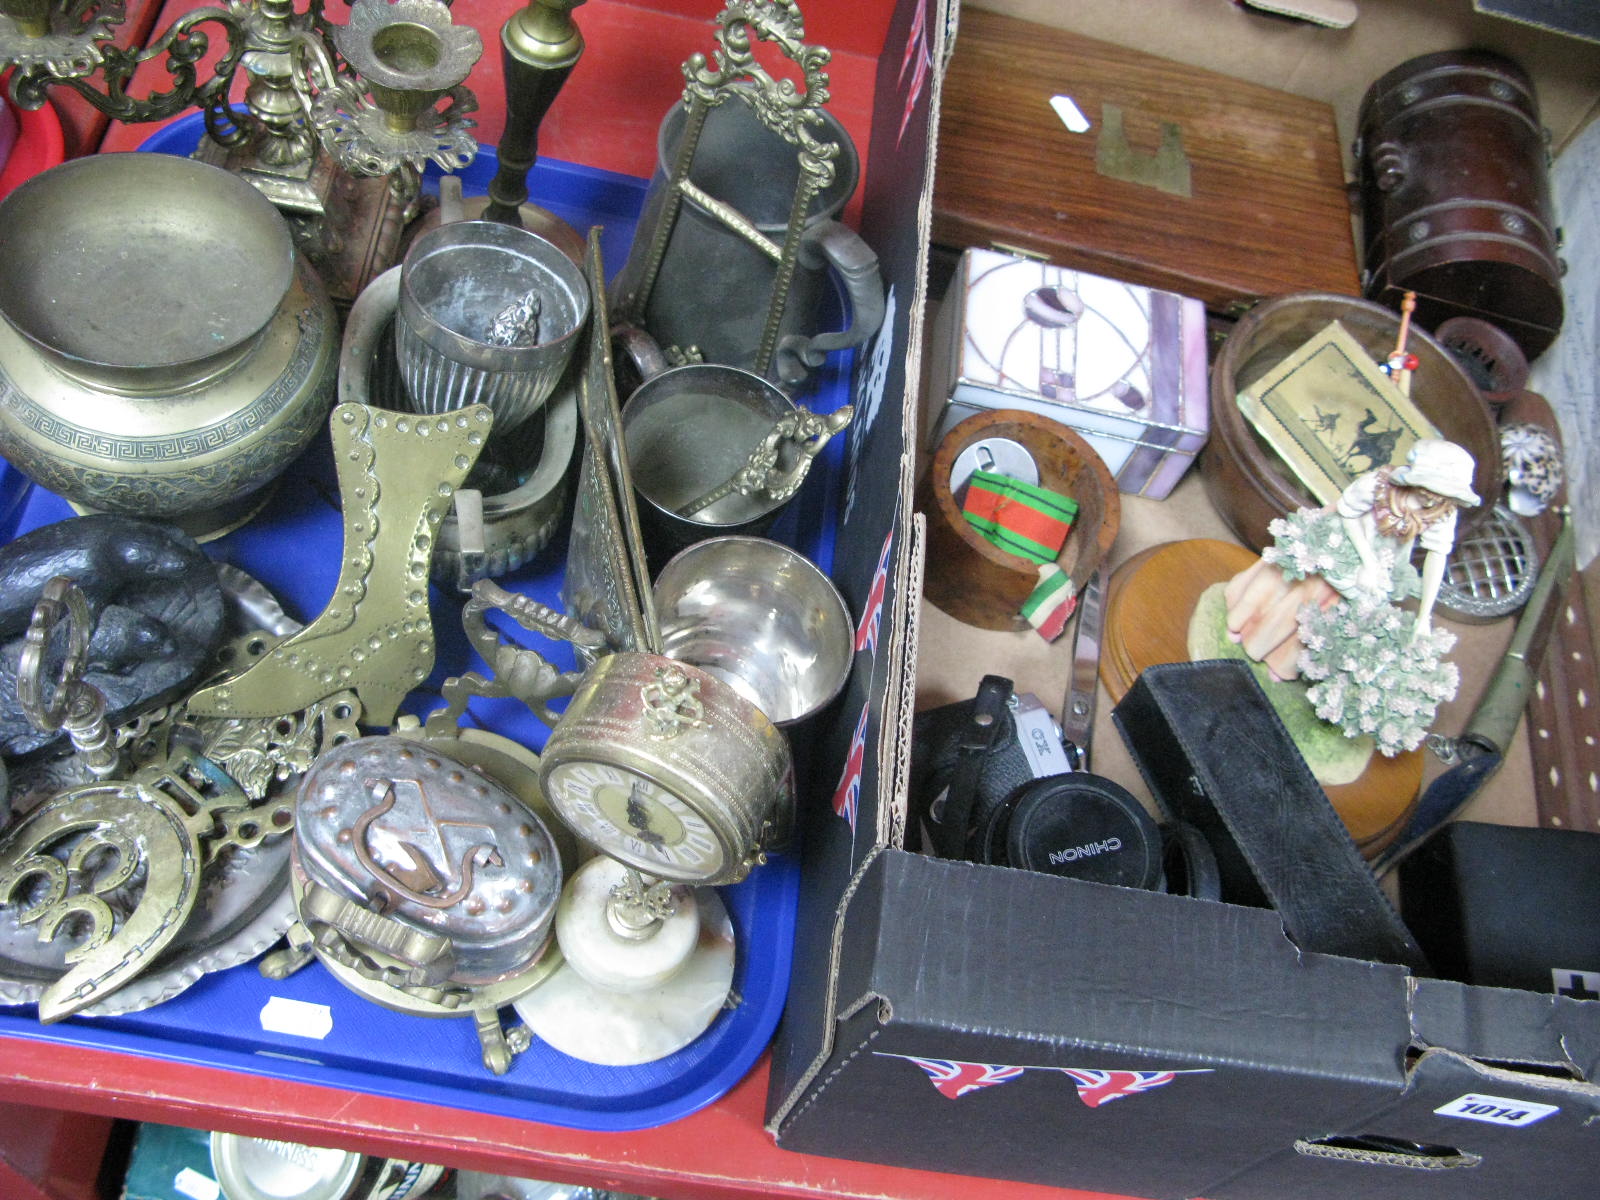 A Cast Iron Four Branch Candelabra, pewter and plated tankards, horse brasses, other metal wares (